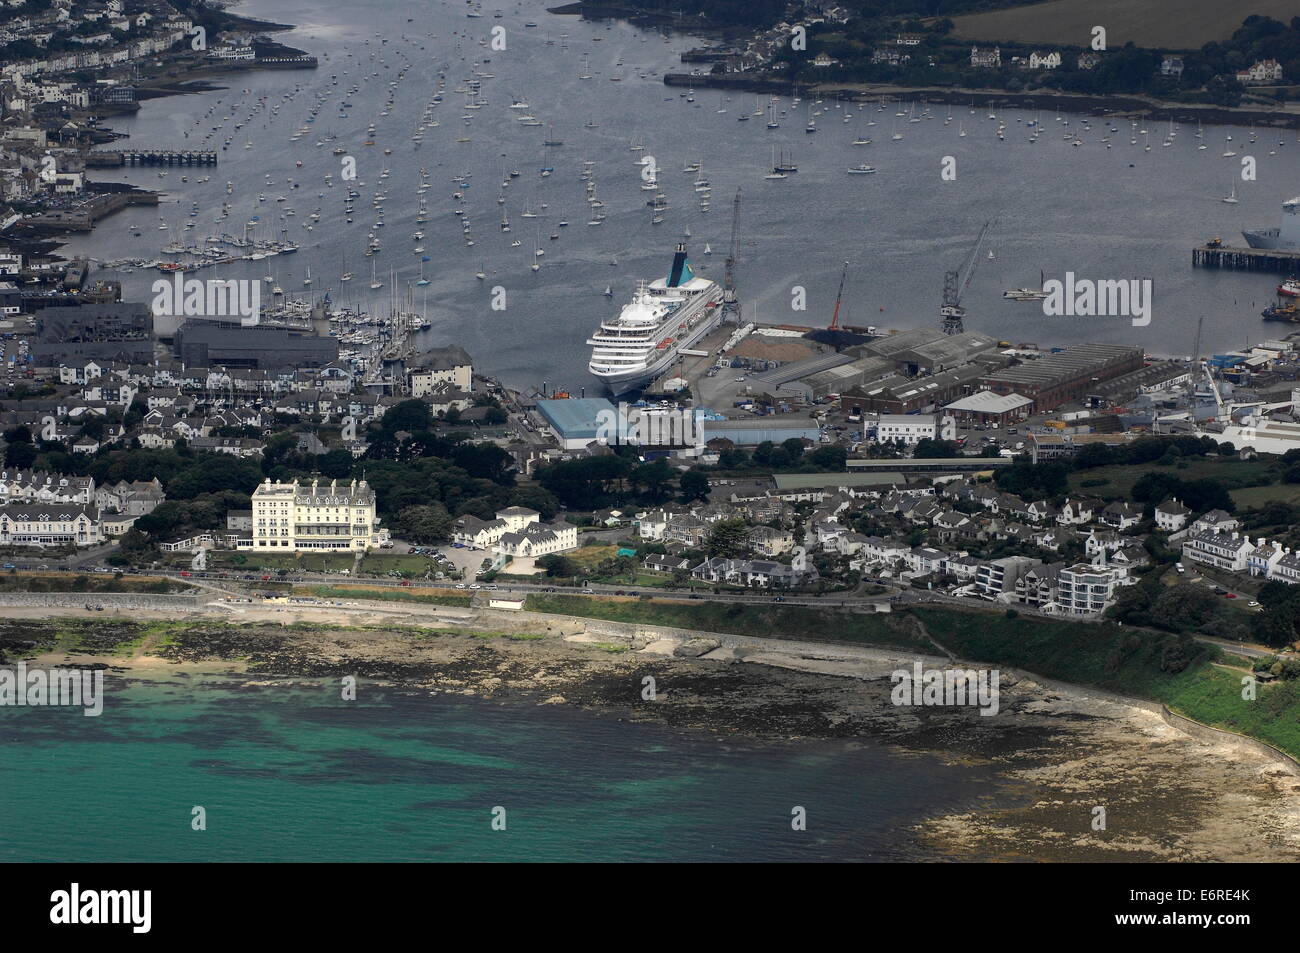 FALMOUTH, ENGLAND. -AERIAL VIEW - THE ENCLOSED HARBOUR SHIP DOCKS AND SMALL BOAT MOORINGS .PHOTO:JONATHAN EASTLAND/AJAX Stock Photo